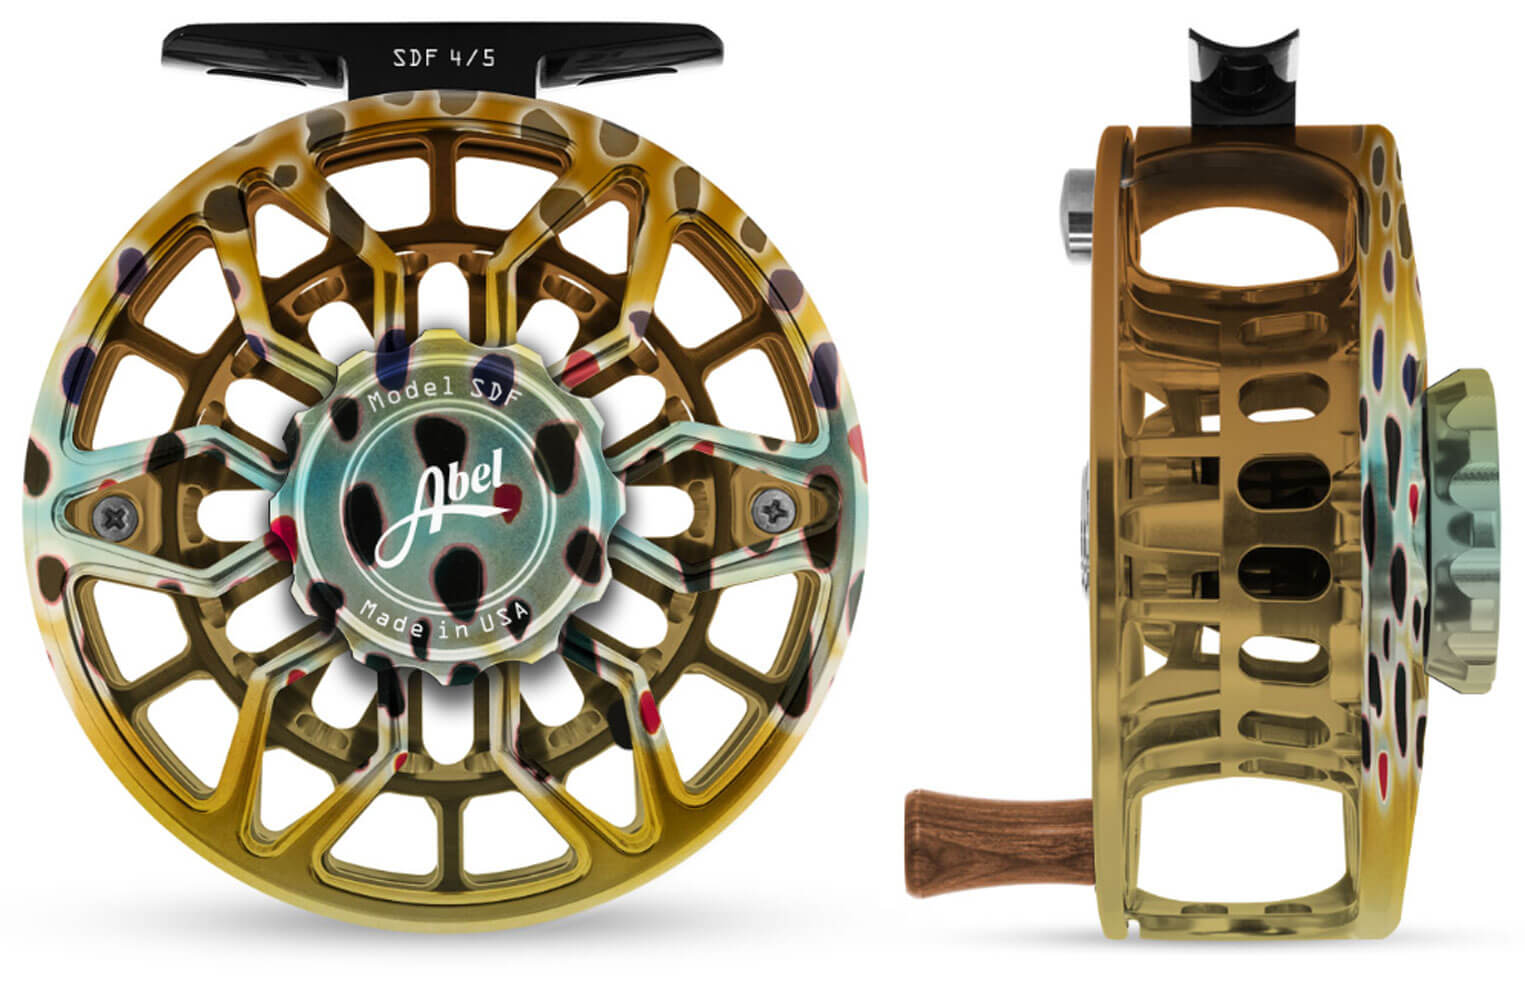 Abel SDF 4/5 reels Archives - Page 2 of 2 - Telluride Angler